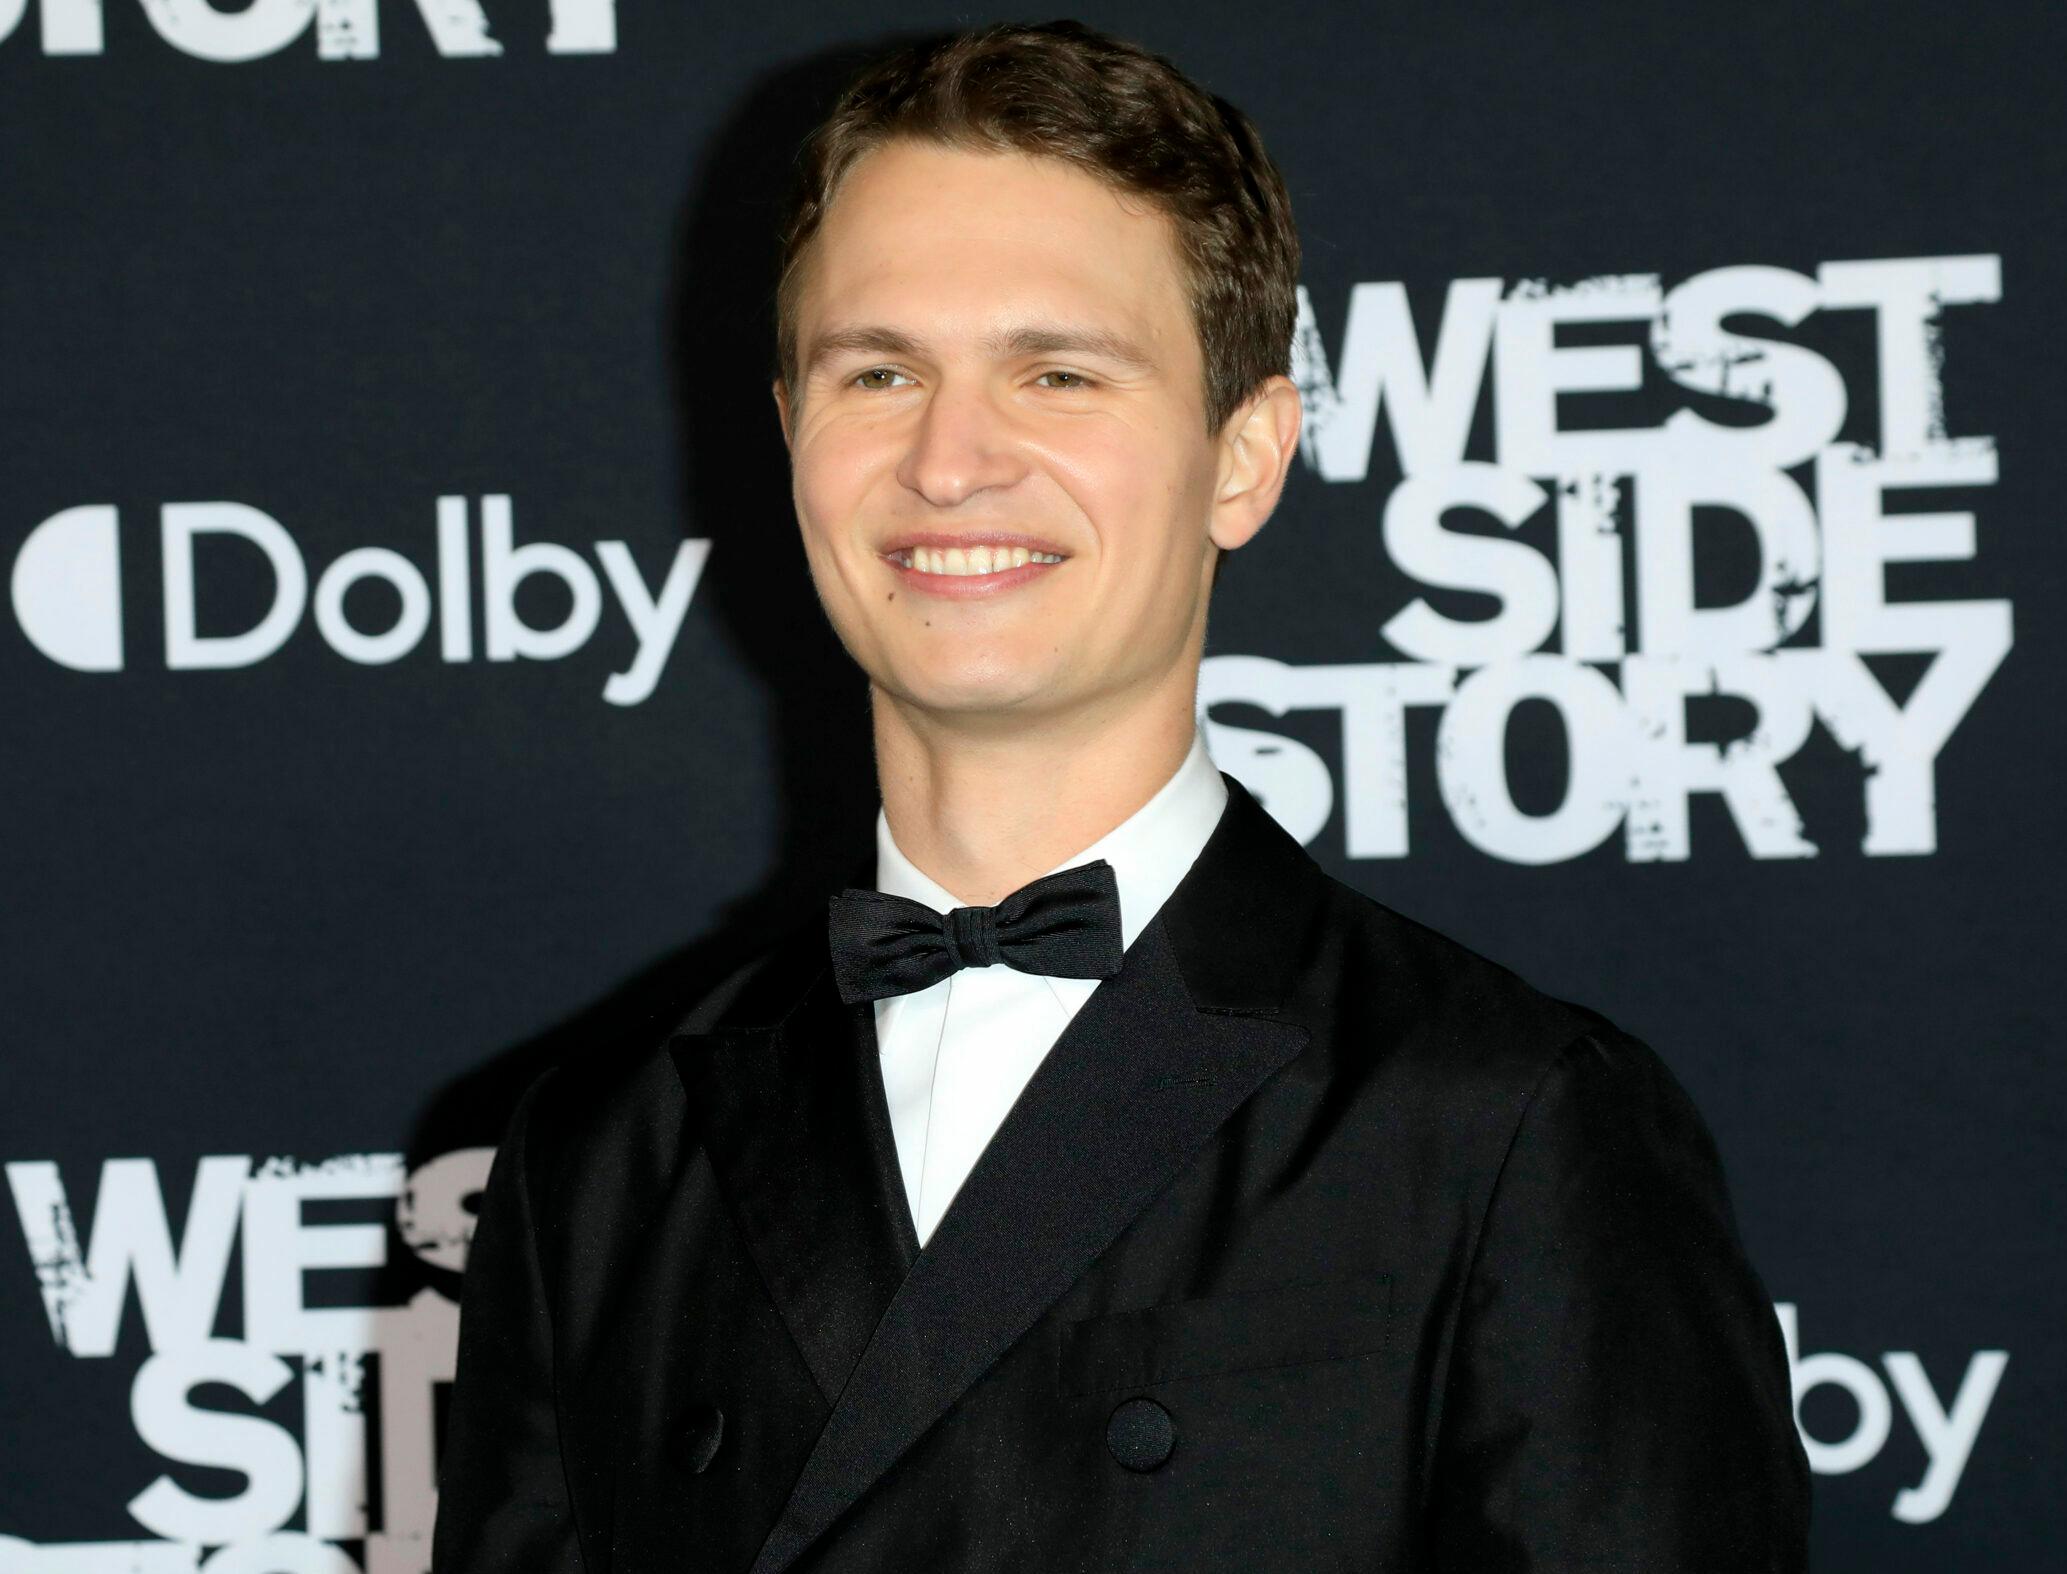 Ansel Elgort at the 'West Side Story' Premiere